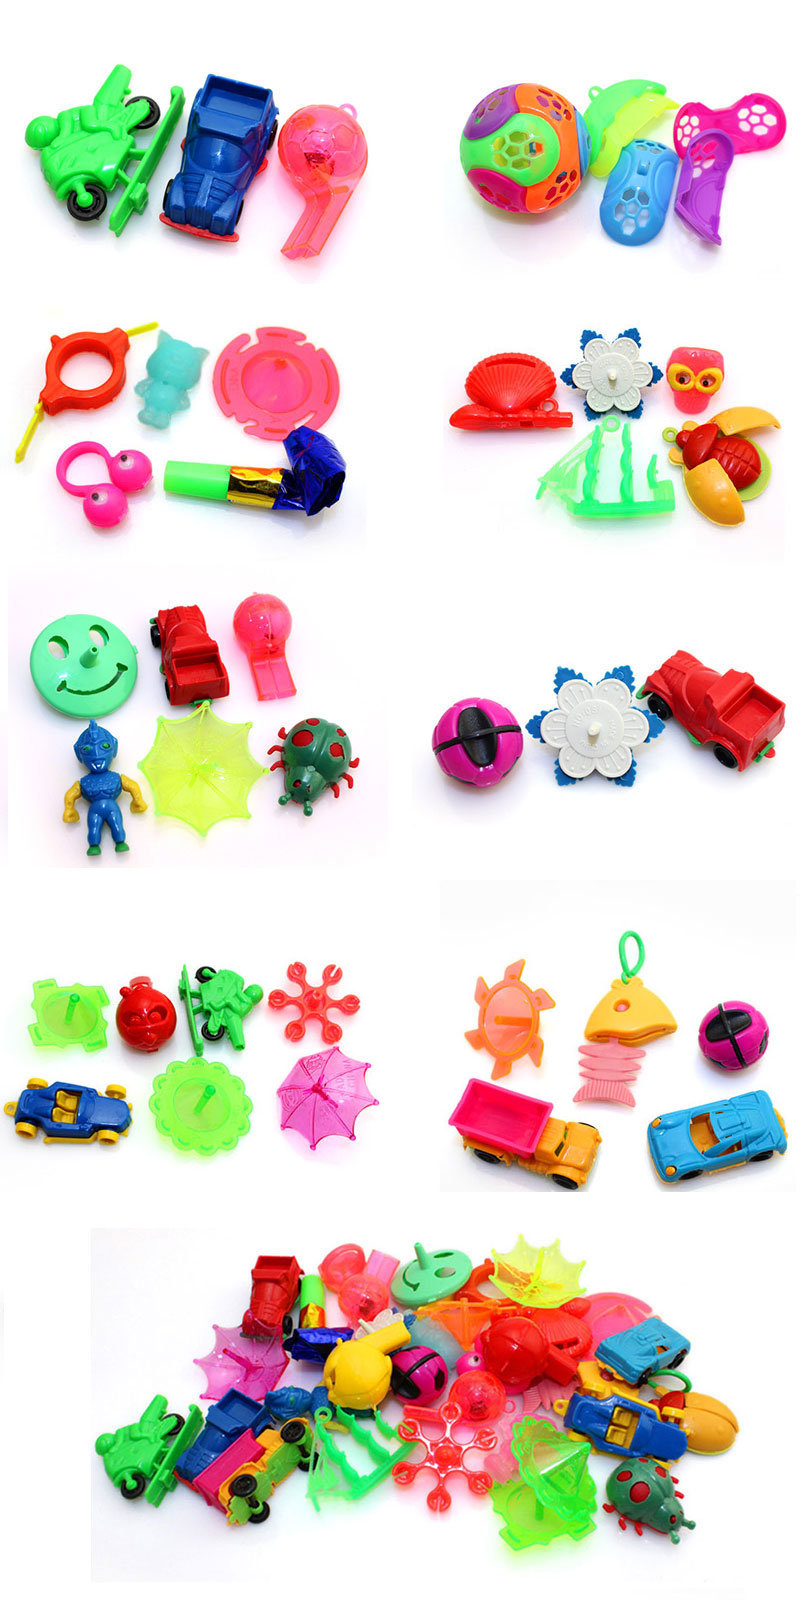 Wholesale Small Plastic Toys Mini Flower Spinning Top for Candy Egg Filler Kids Gifts Prizes Toy